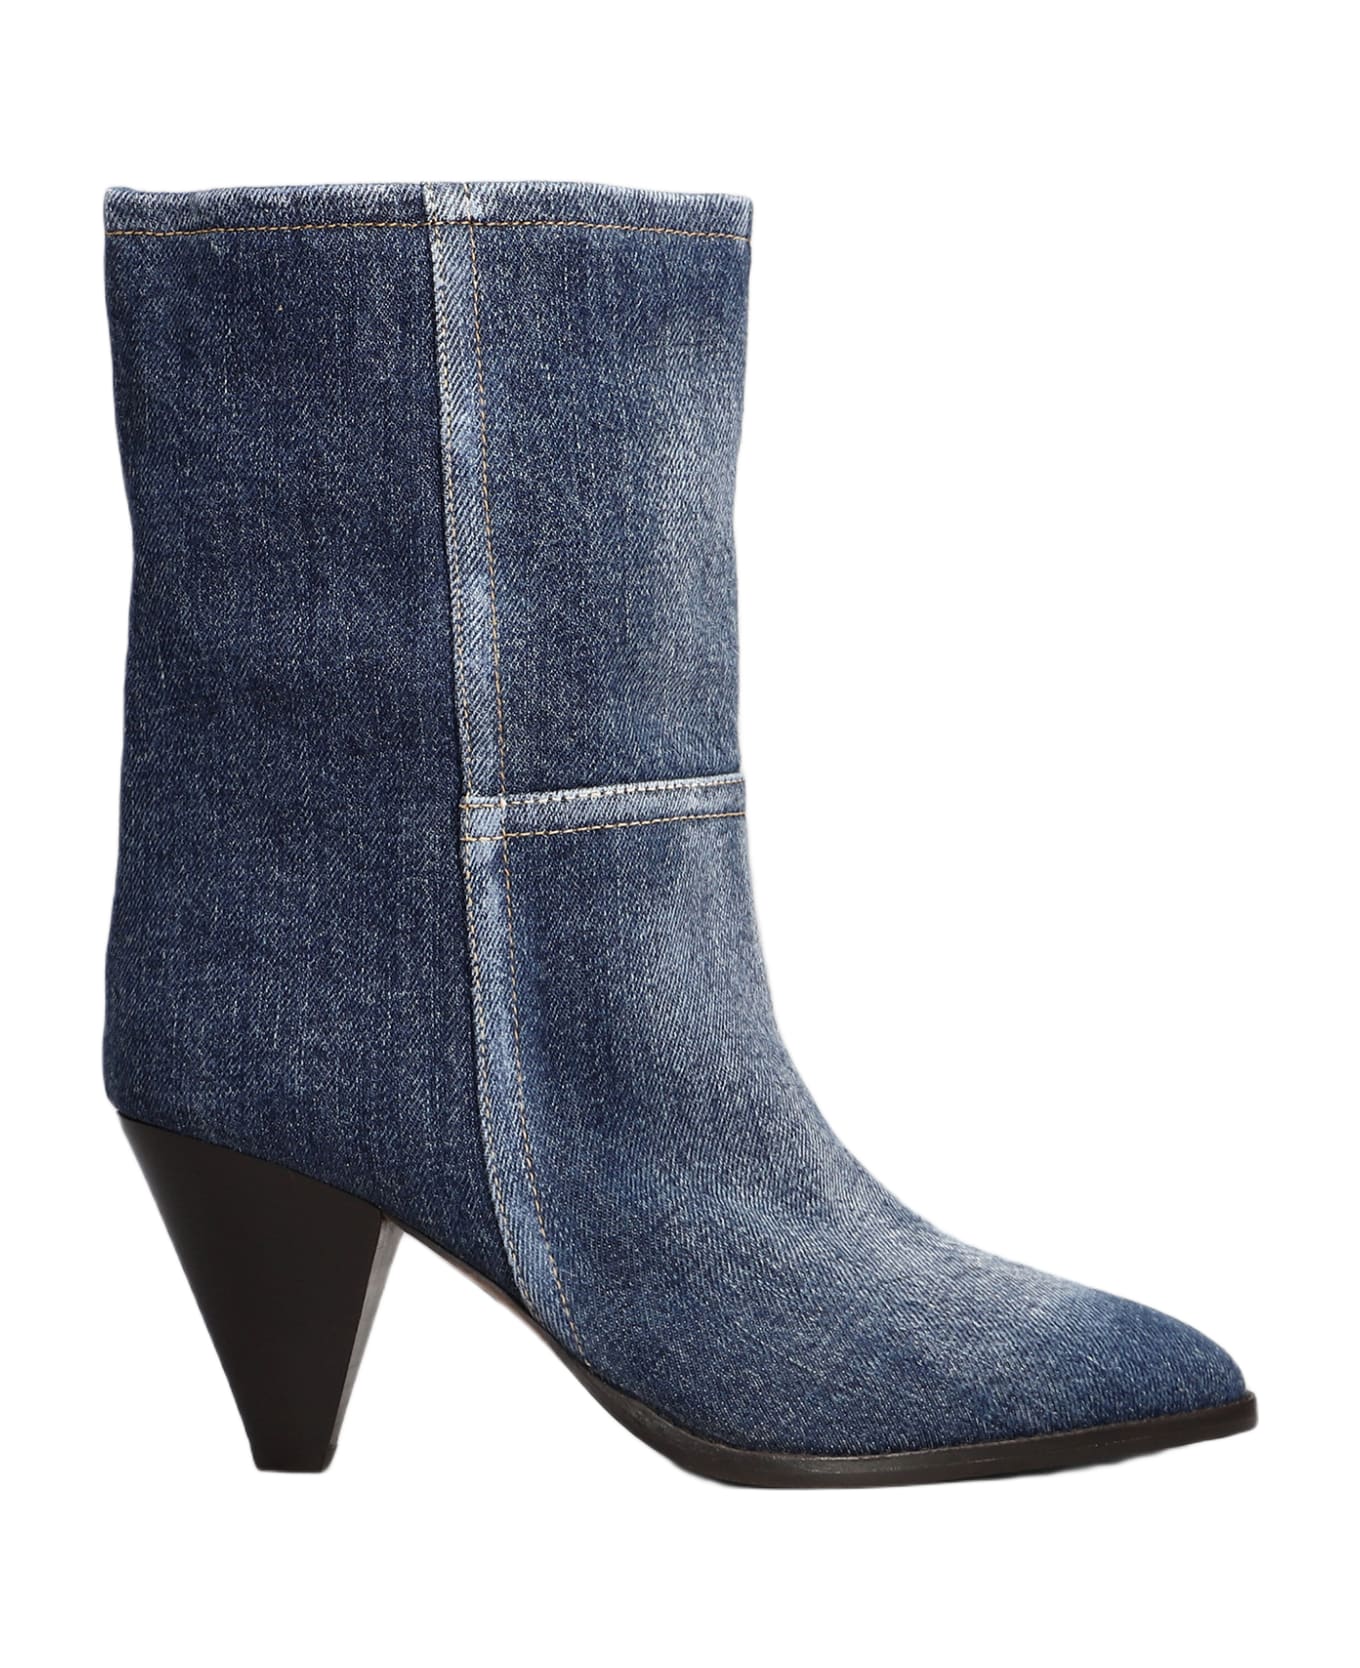 Isabel Marant Rouxa High Heels Ankle Boots - WASHED BLUE